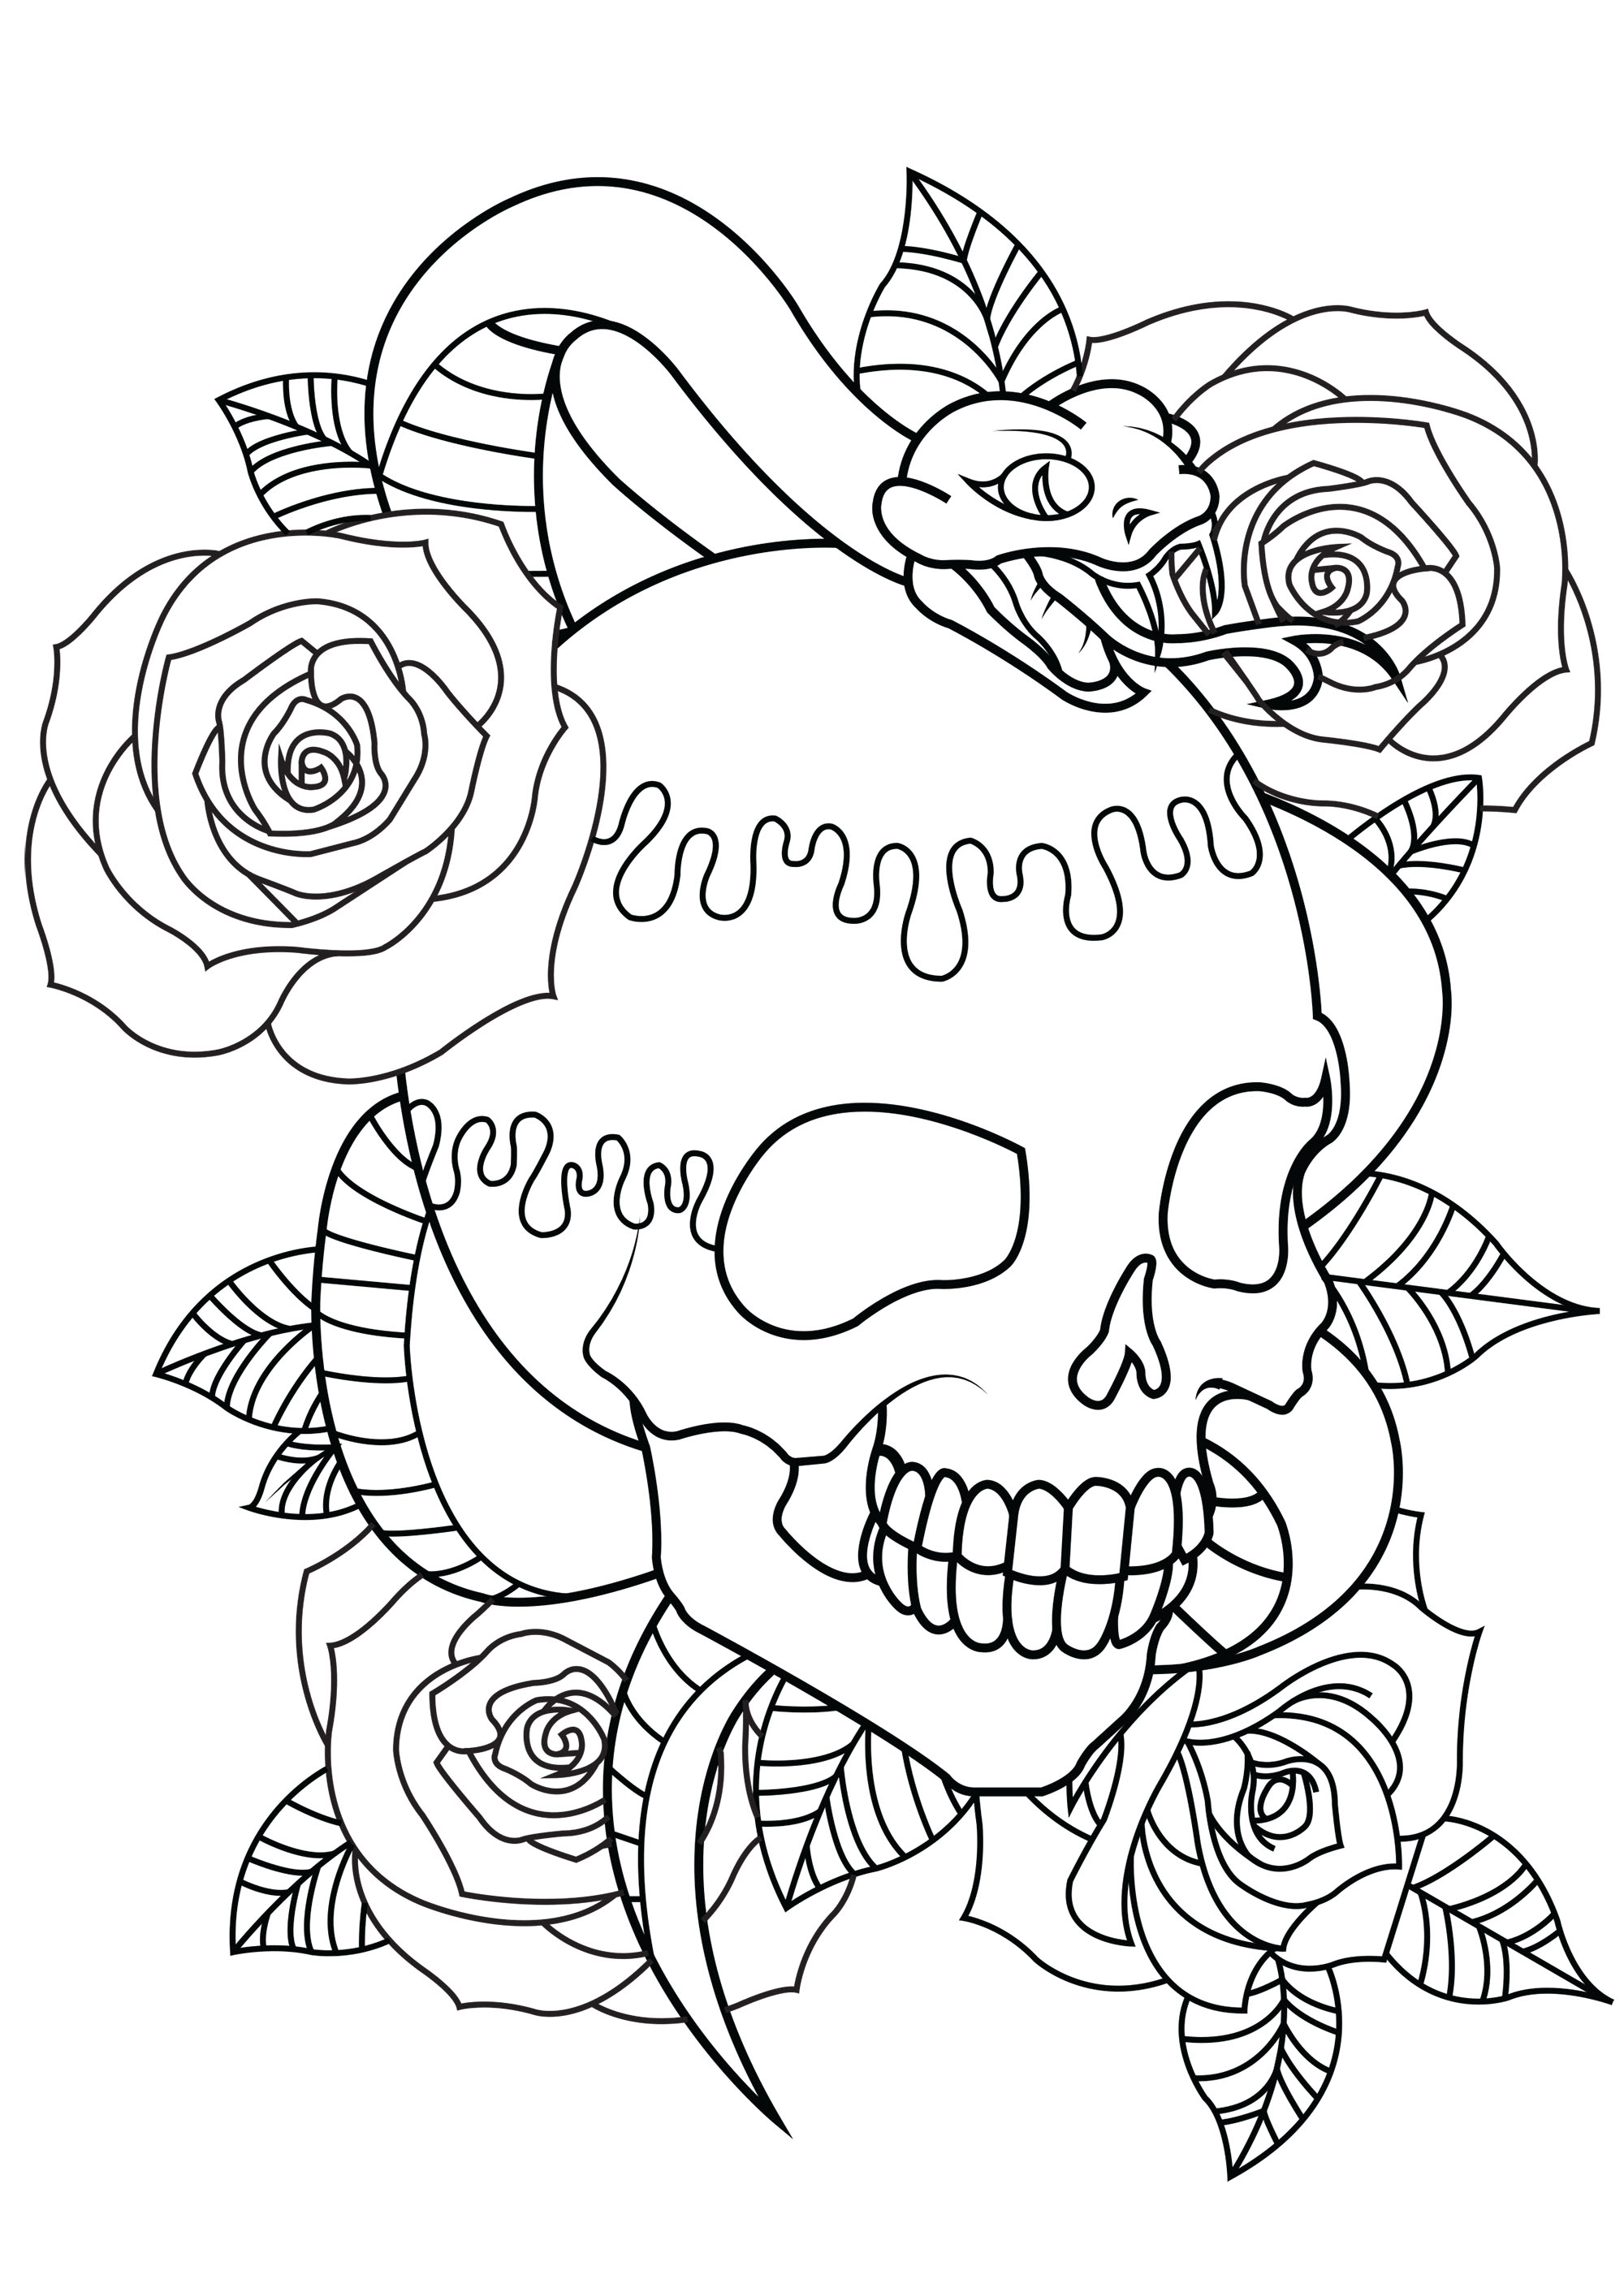 Tattoo with skull, snake and roses - Tattoos Adult Coloring ...